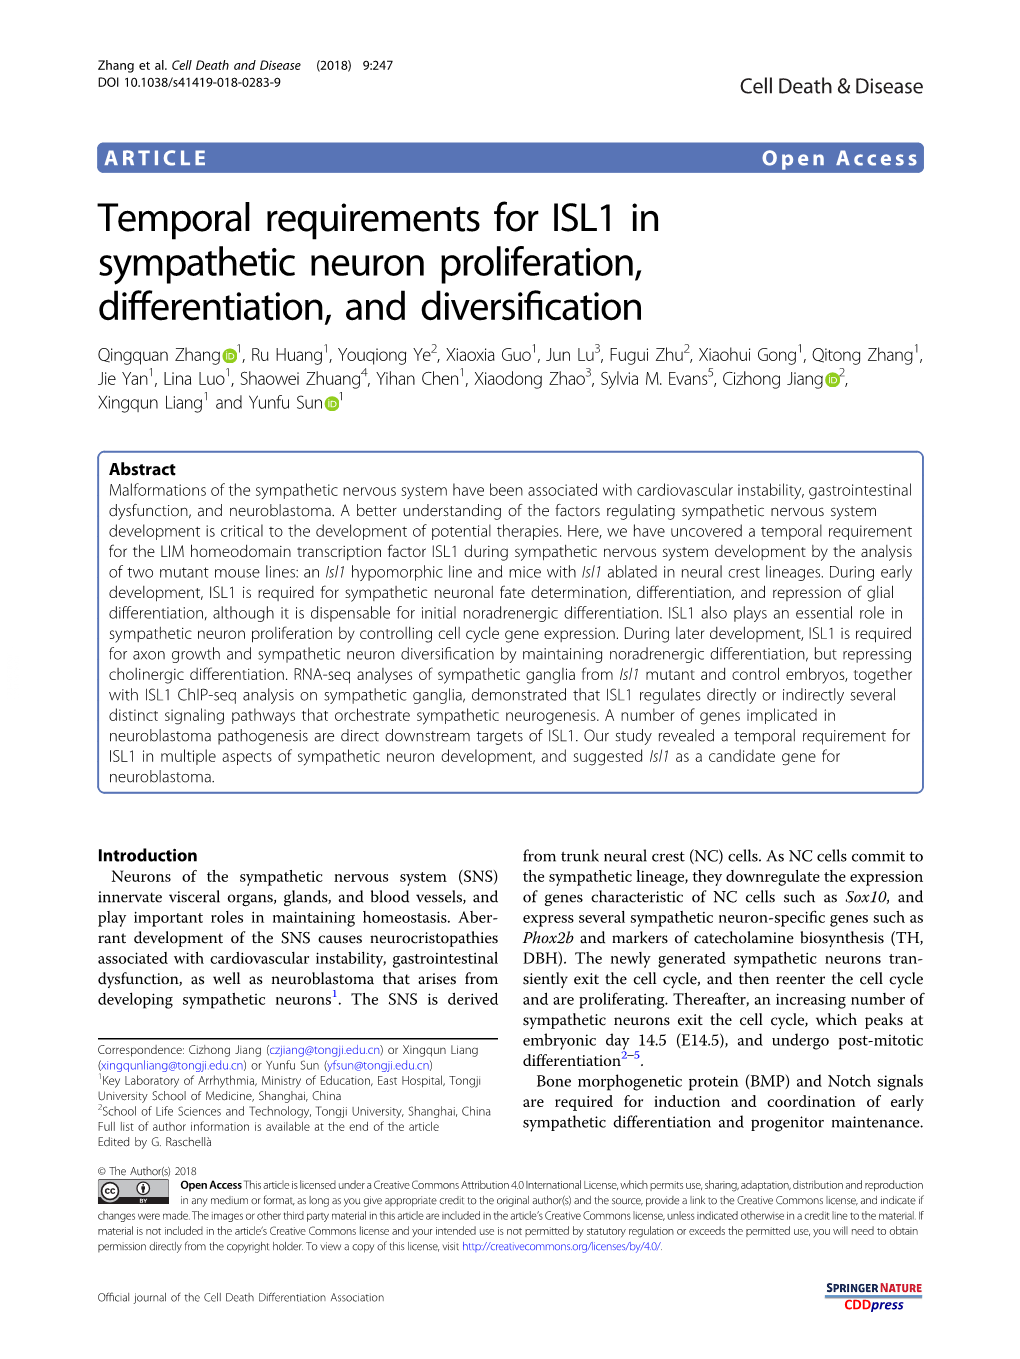 Temporal Requirements for ISL1 in Sympathetic Neuron Proliferation